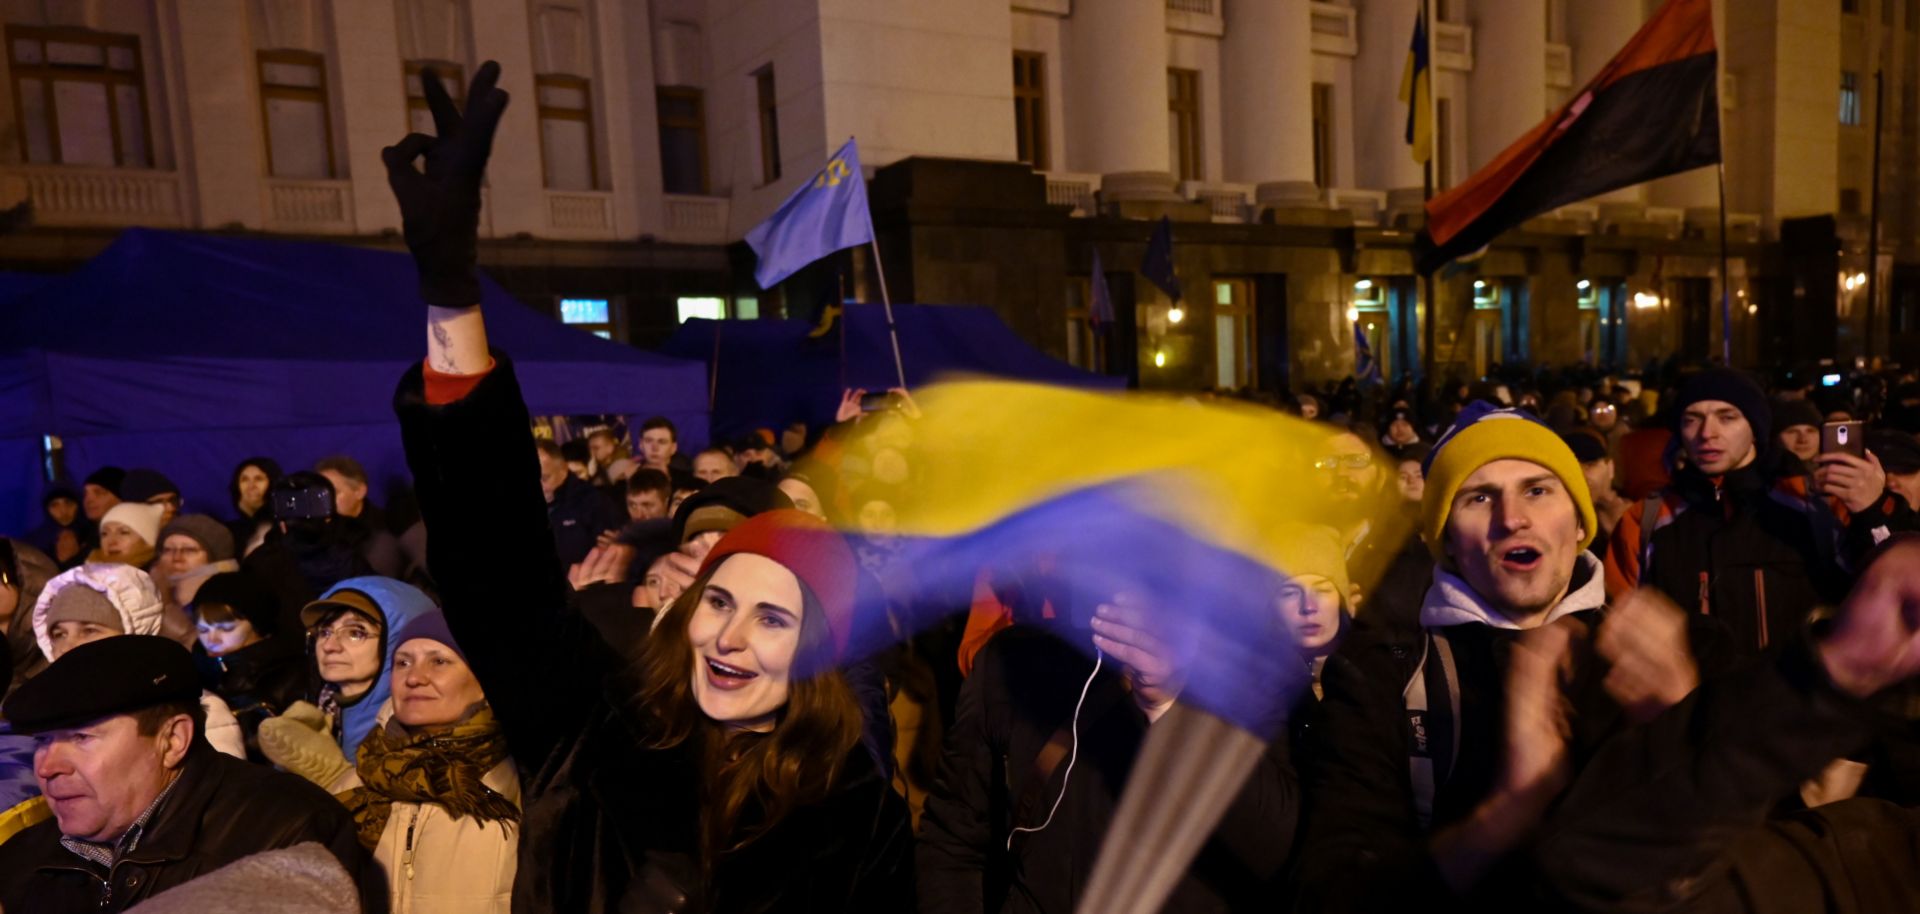 People gather outside the presidential office in Kyiv on Dec. 9, 2019, as they wait for news of talks held in Paris to try to end the conflict in eastern Ukraine.